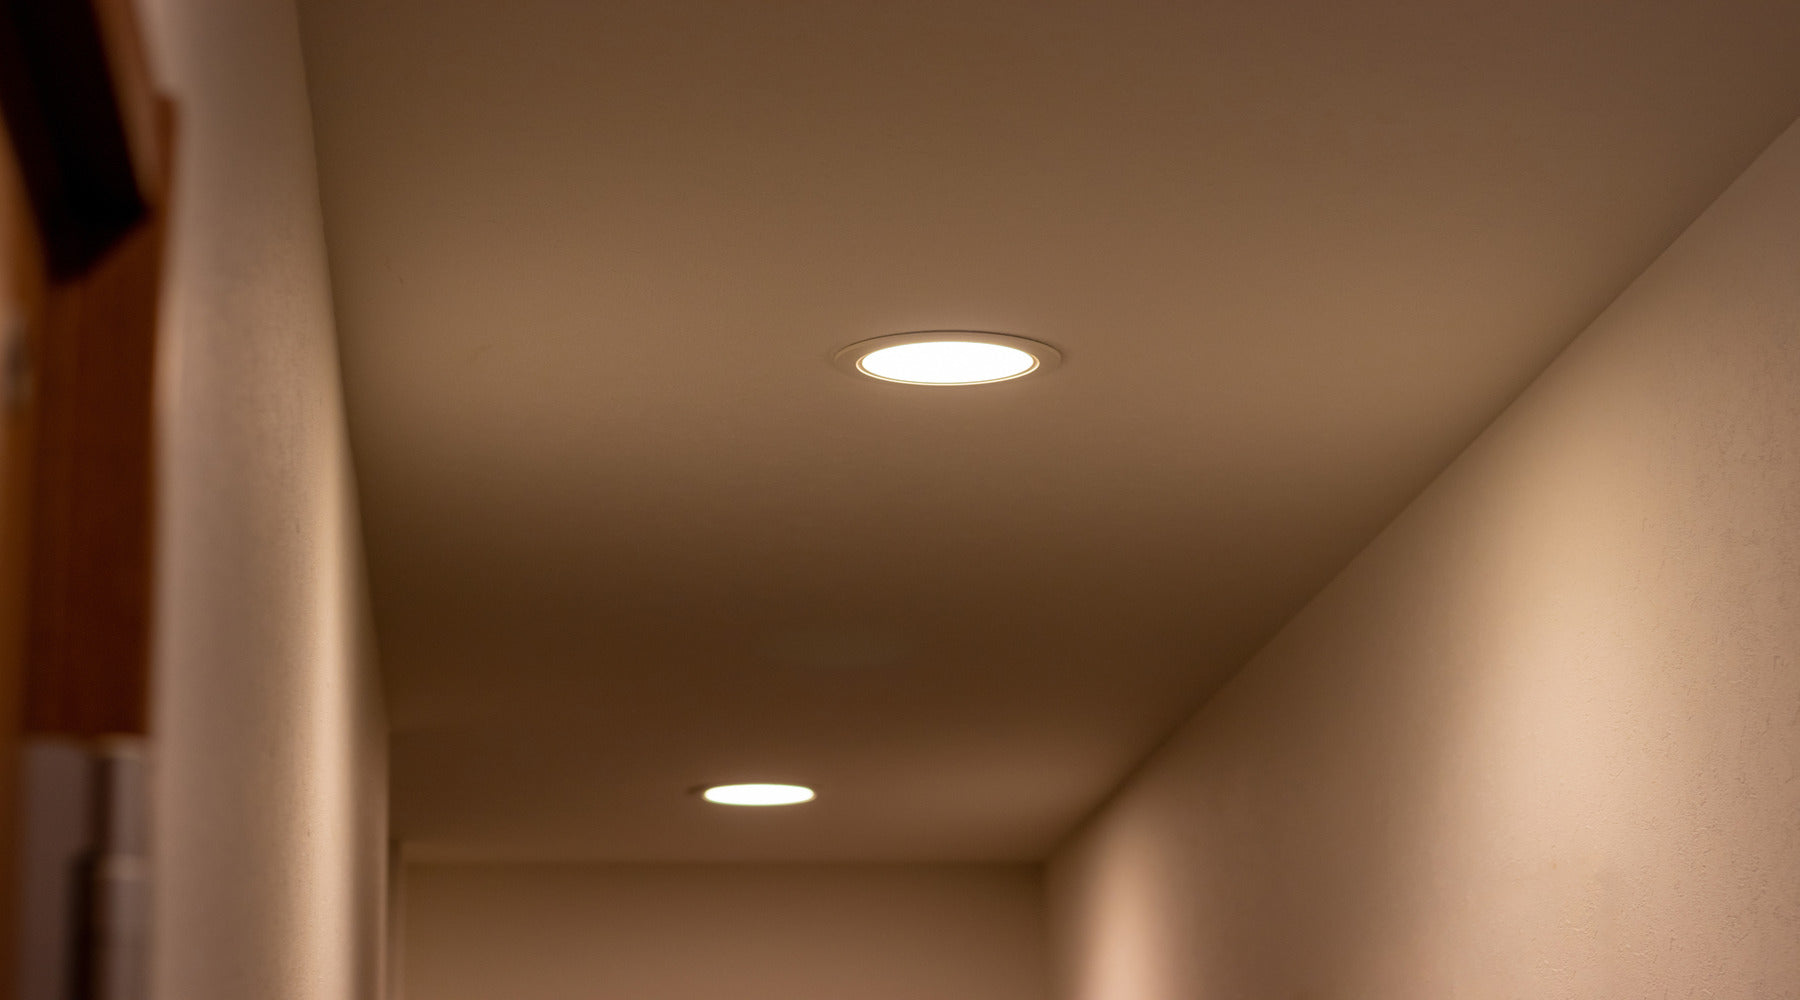 BR30 LED bulbs being used in 6 inch recessed lights in hallway